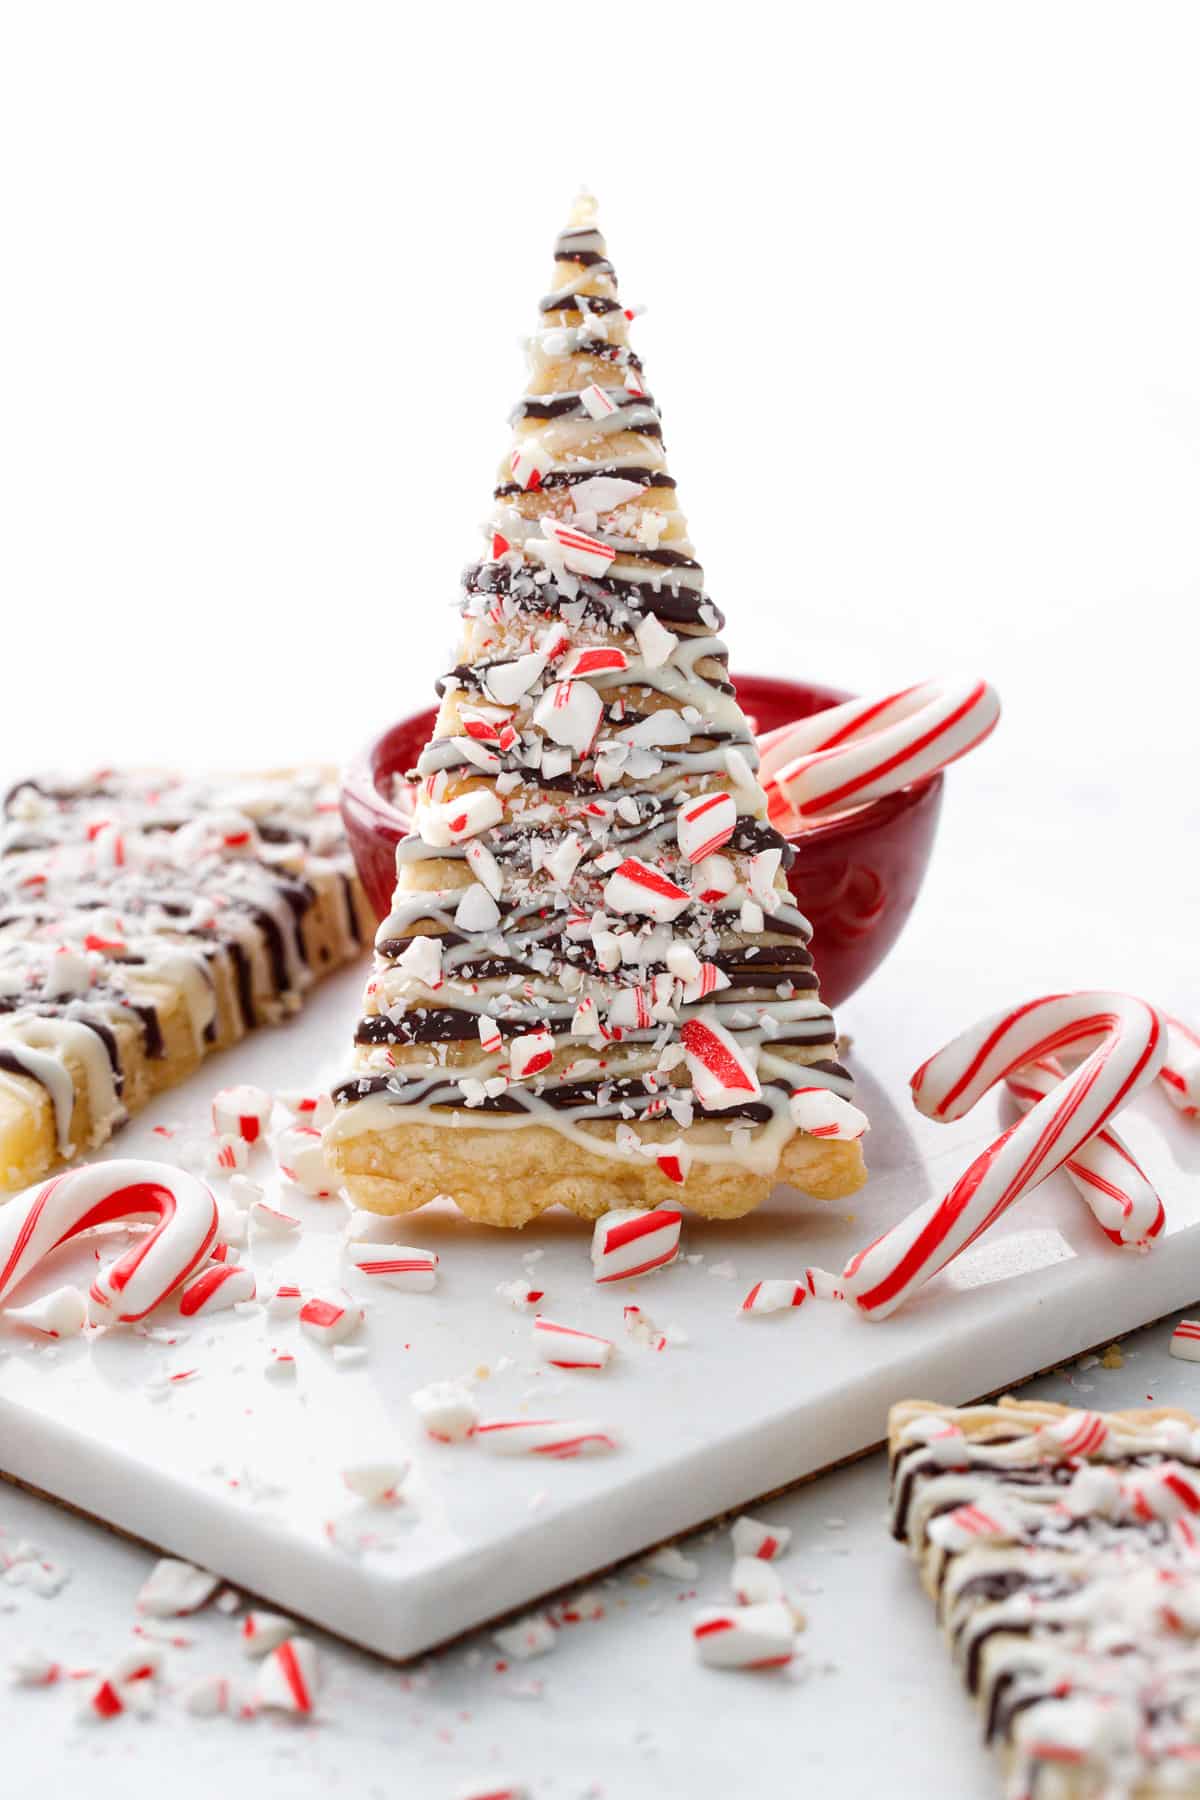 Christmas-tree shaped Peppermint Bark Shortbread cookies, cut into triangles and drizzled with white and dark chocolate and crushed candy cane pieces.